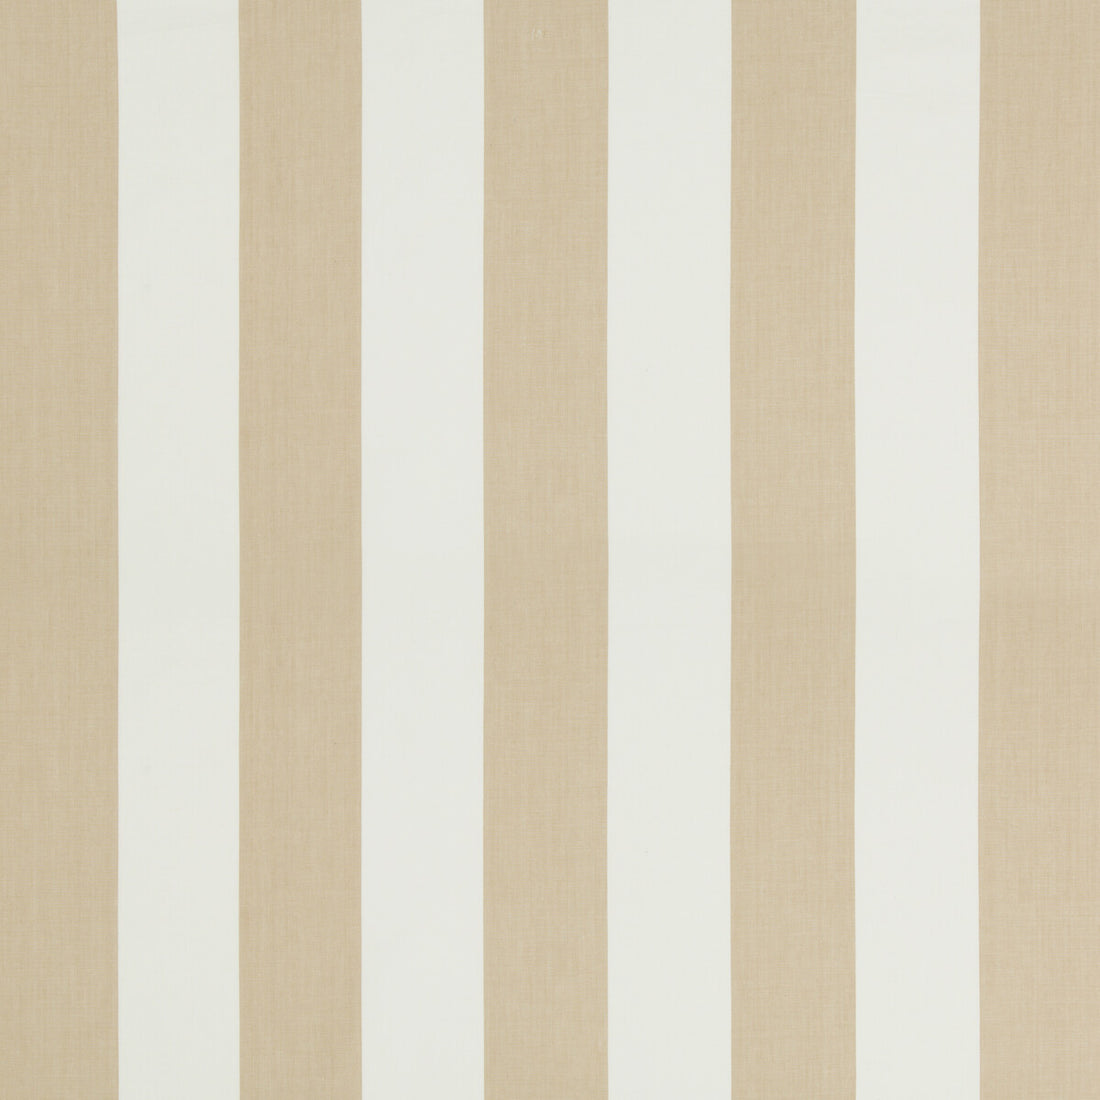 St Croix Stripe fabric in beige color - pattern 2018145.116.0 - by Lee Jofa in the Suzanne Kasler The Riviera collection